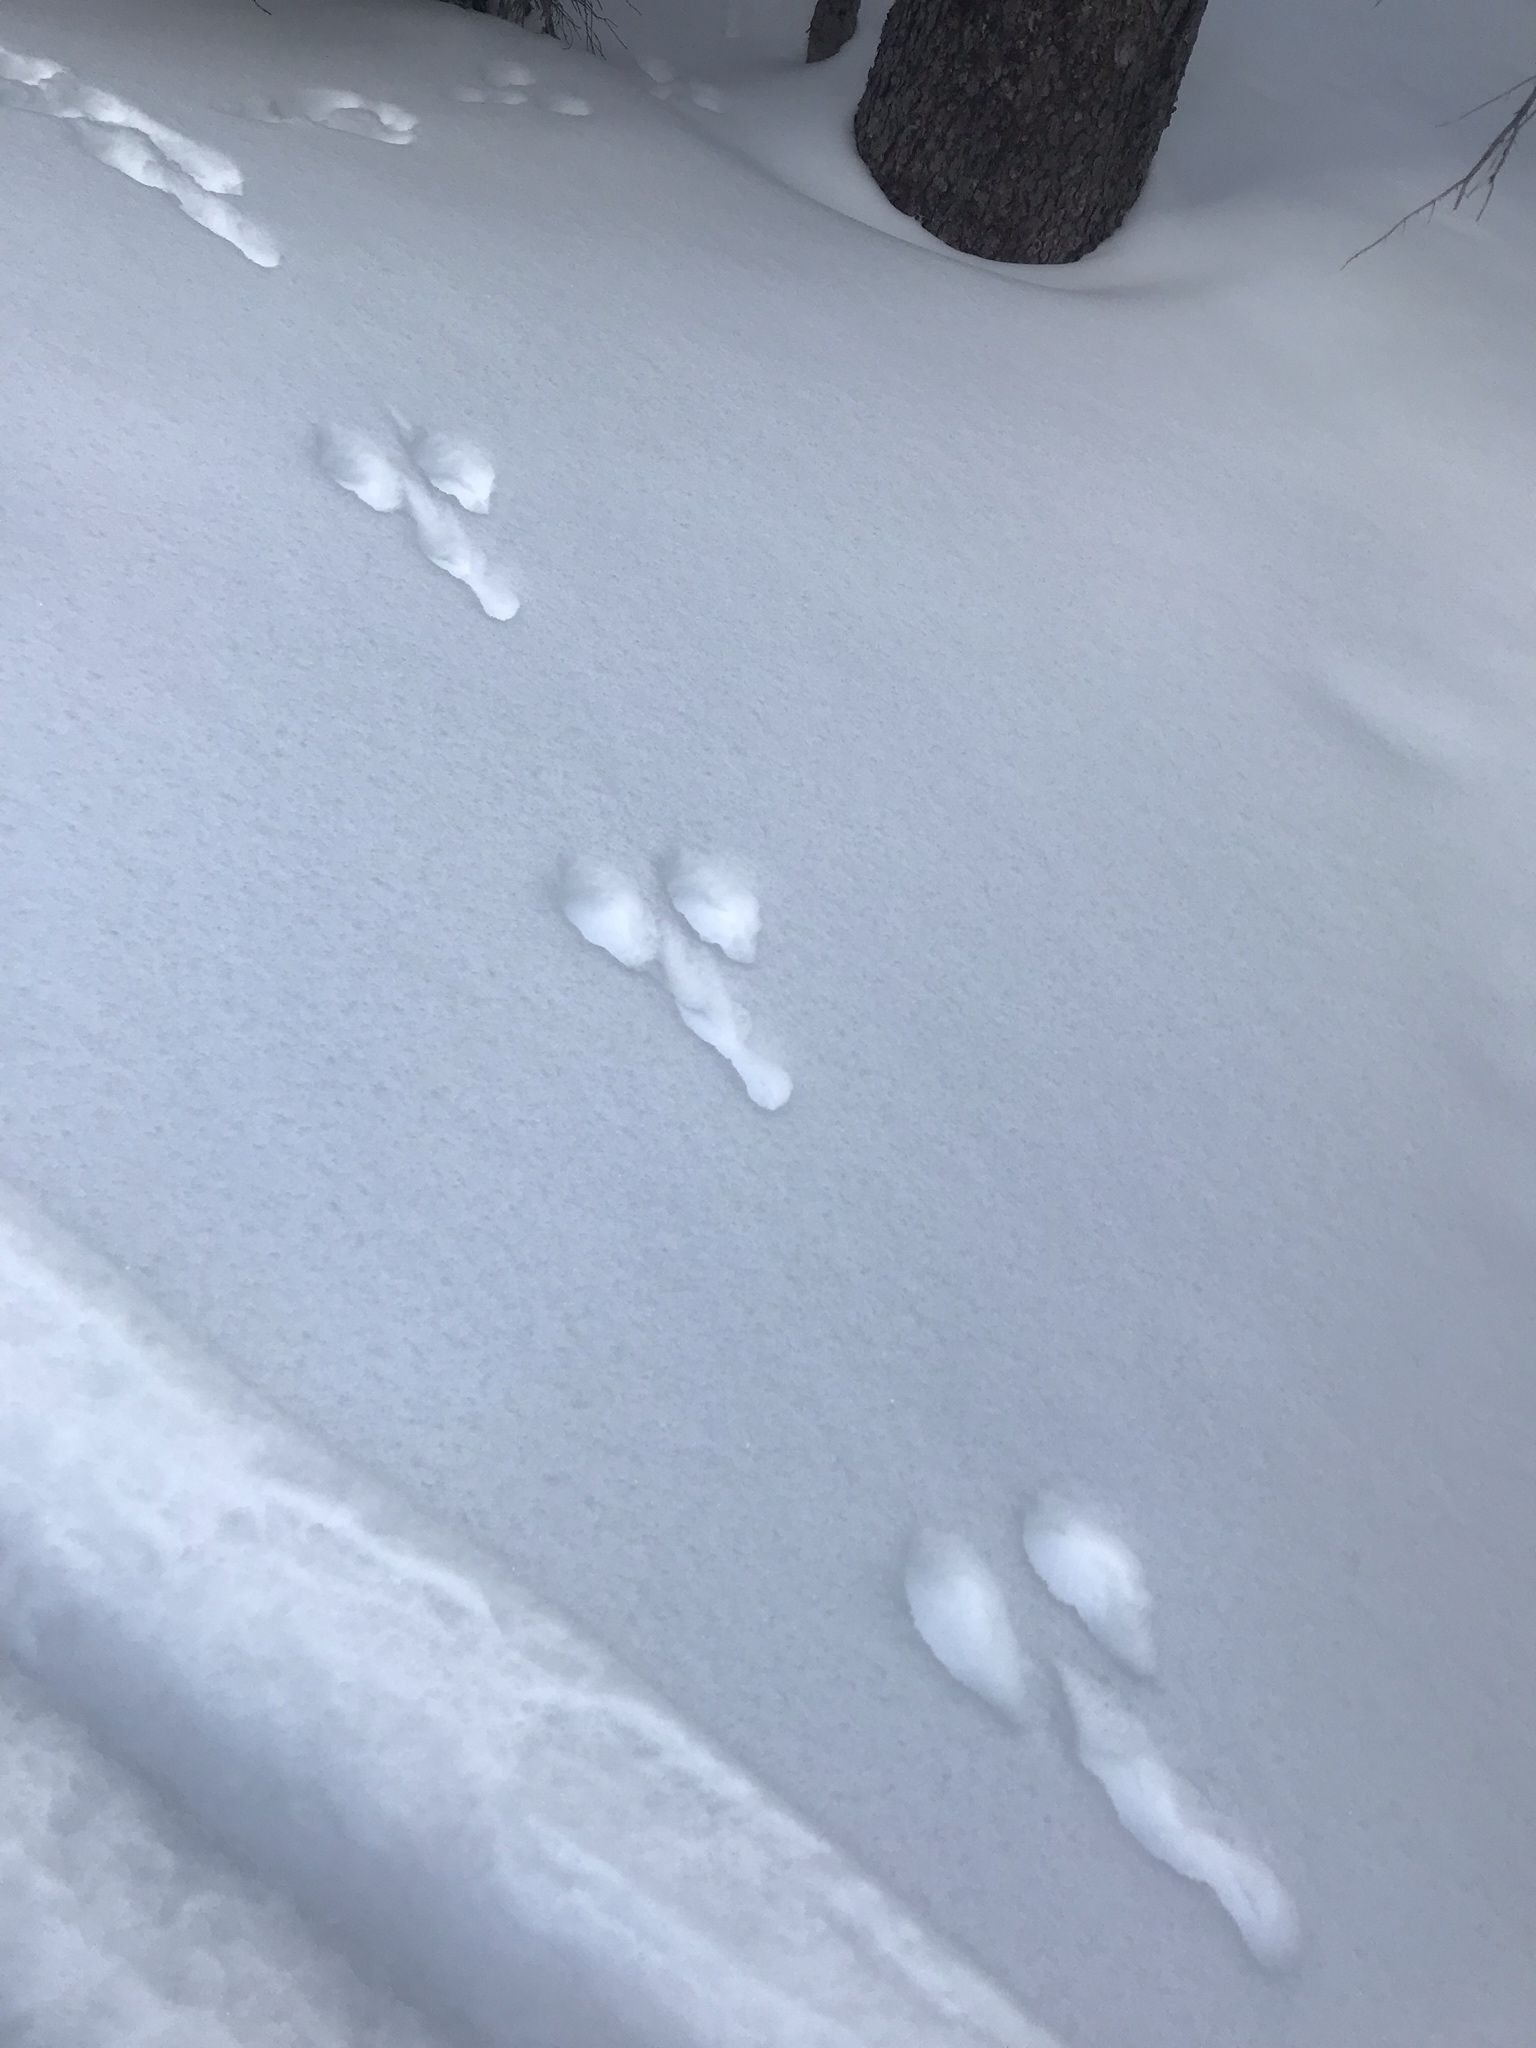 What animal made these tracks? The dickalope?